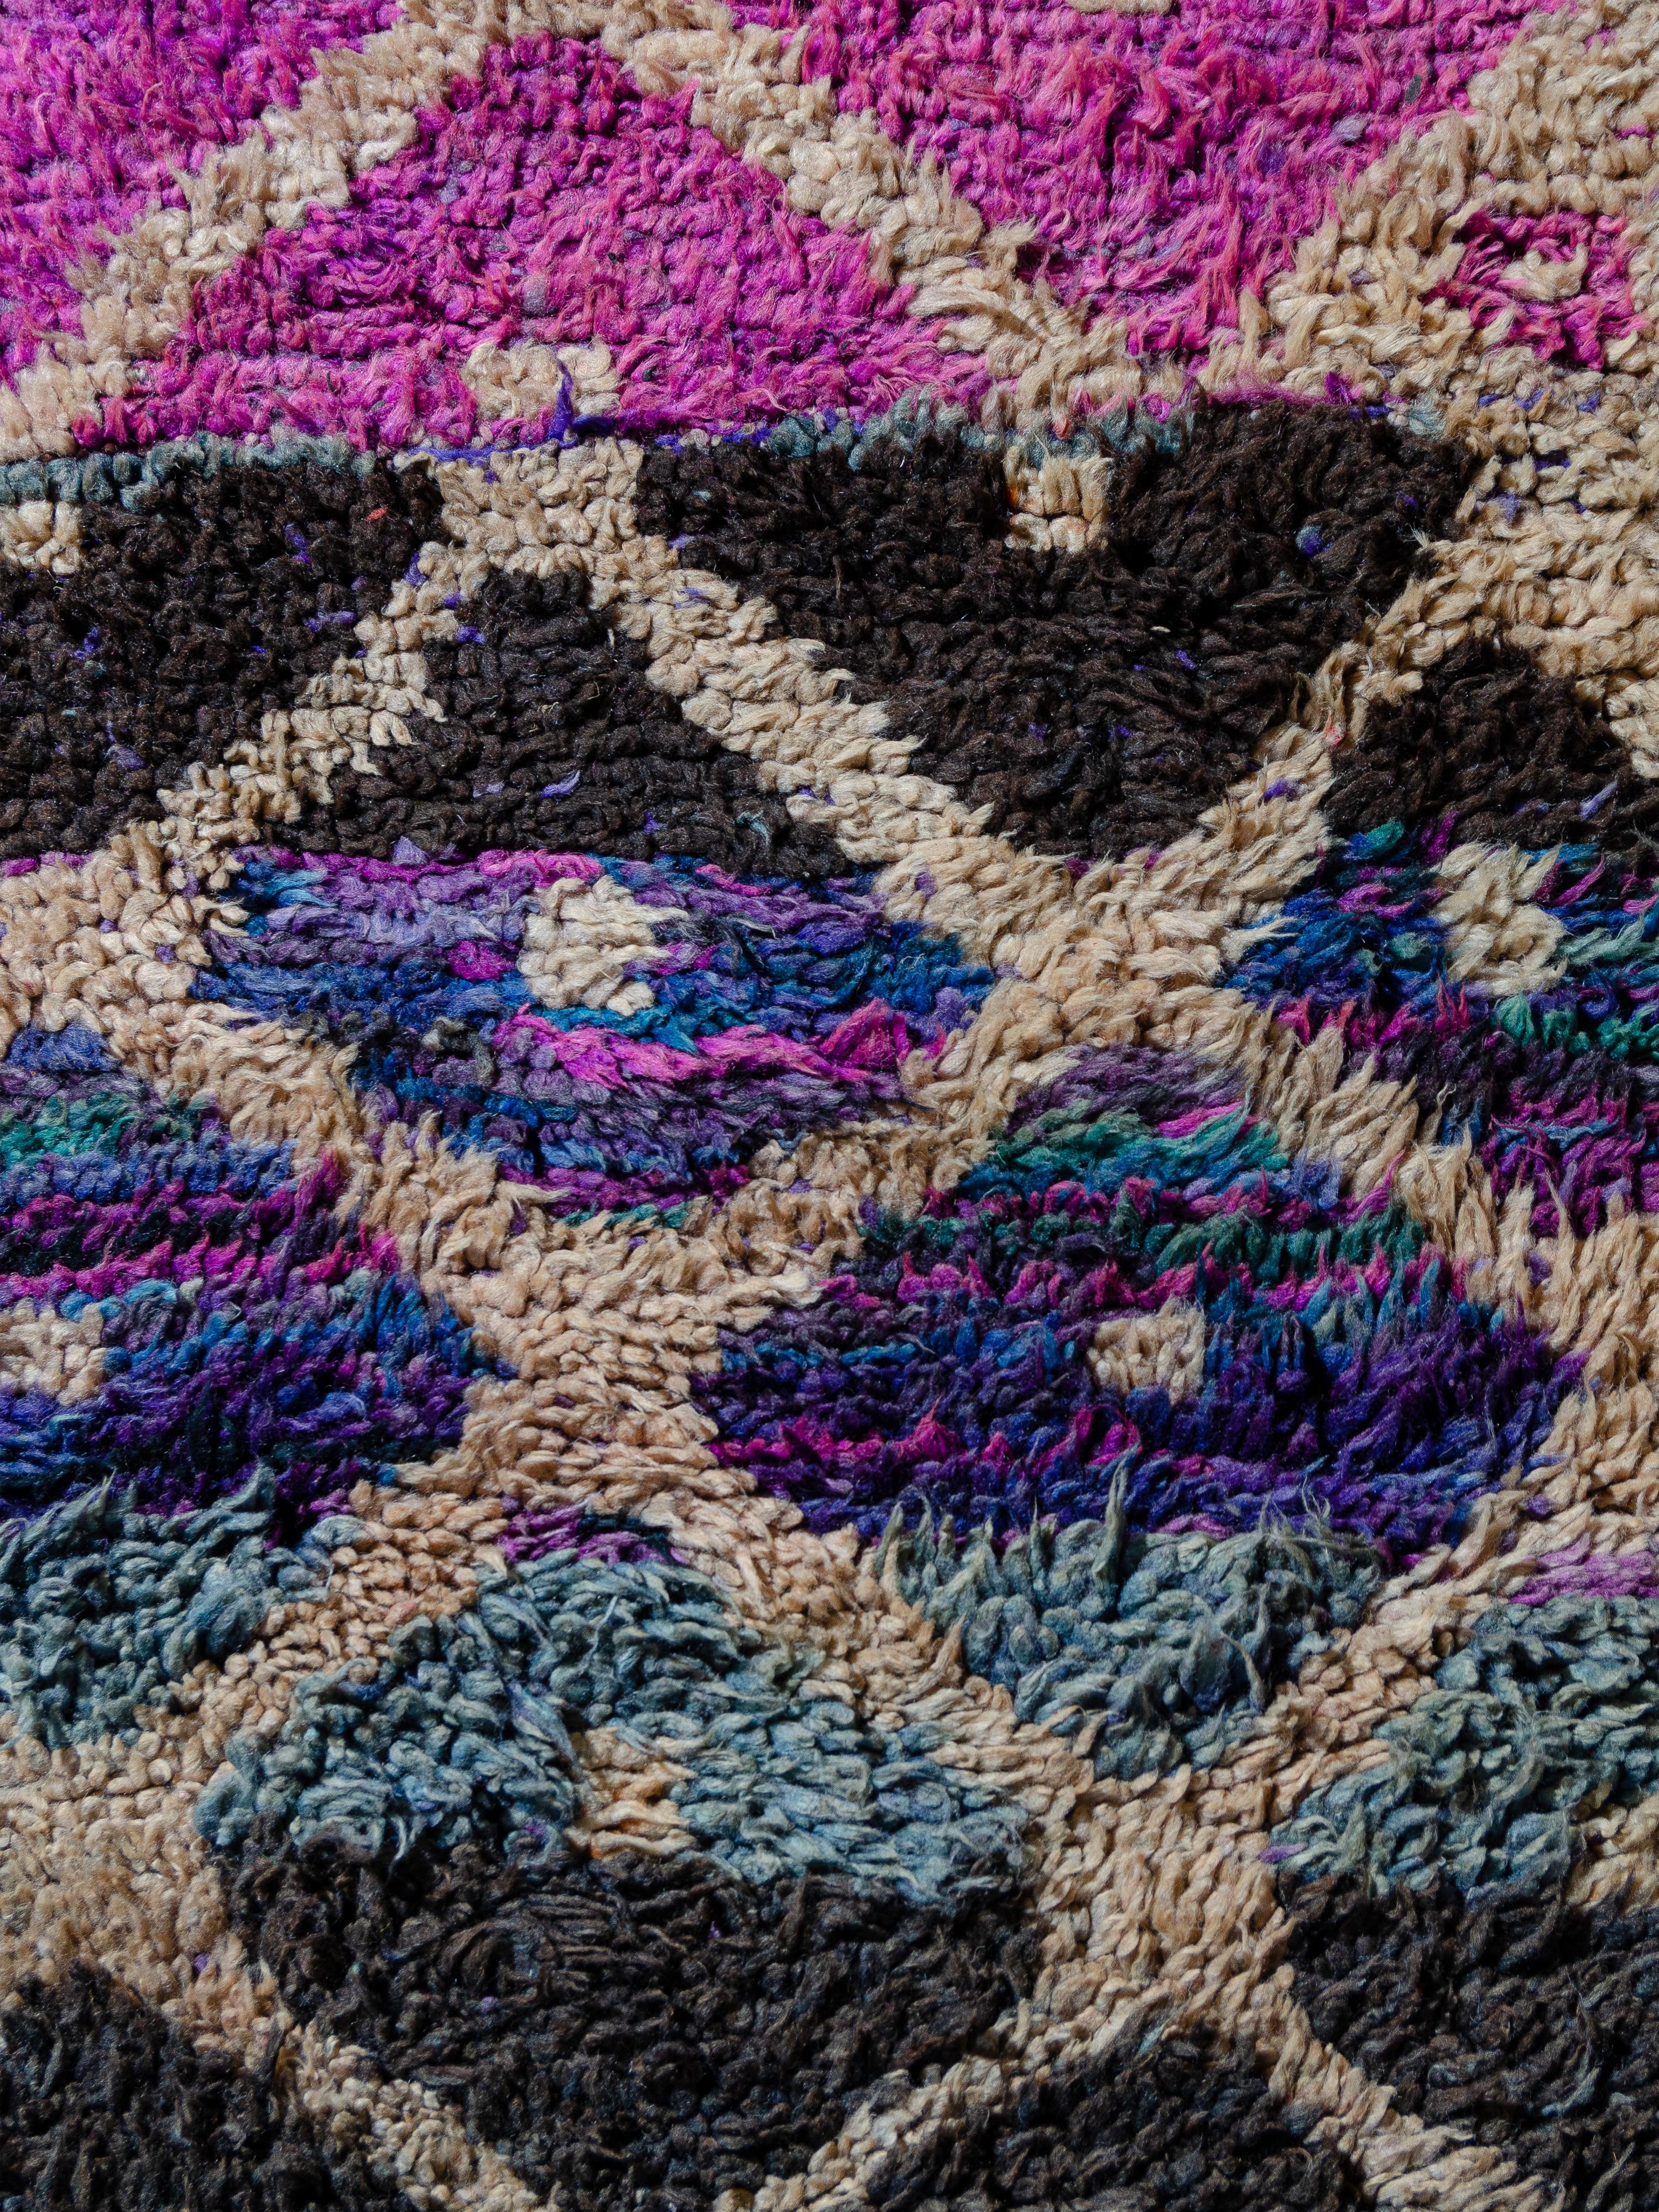 Unapologetic and unafraid of color, this vintage Boujad features an ecru lozenge network overlaying a field of vibrant fuchsia, violet, teal, turquoise, and dark brown. The neutral layer has a fluid quality, gradating in density across the